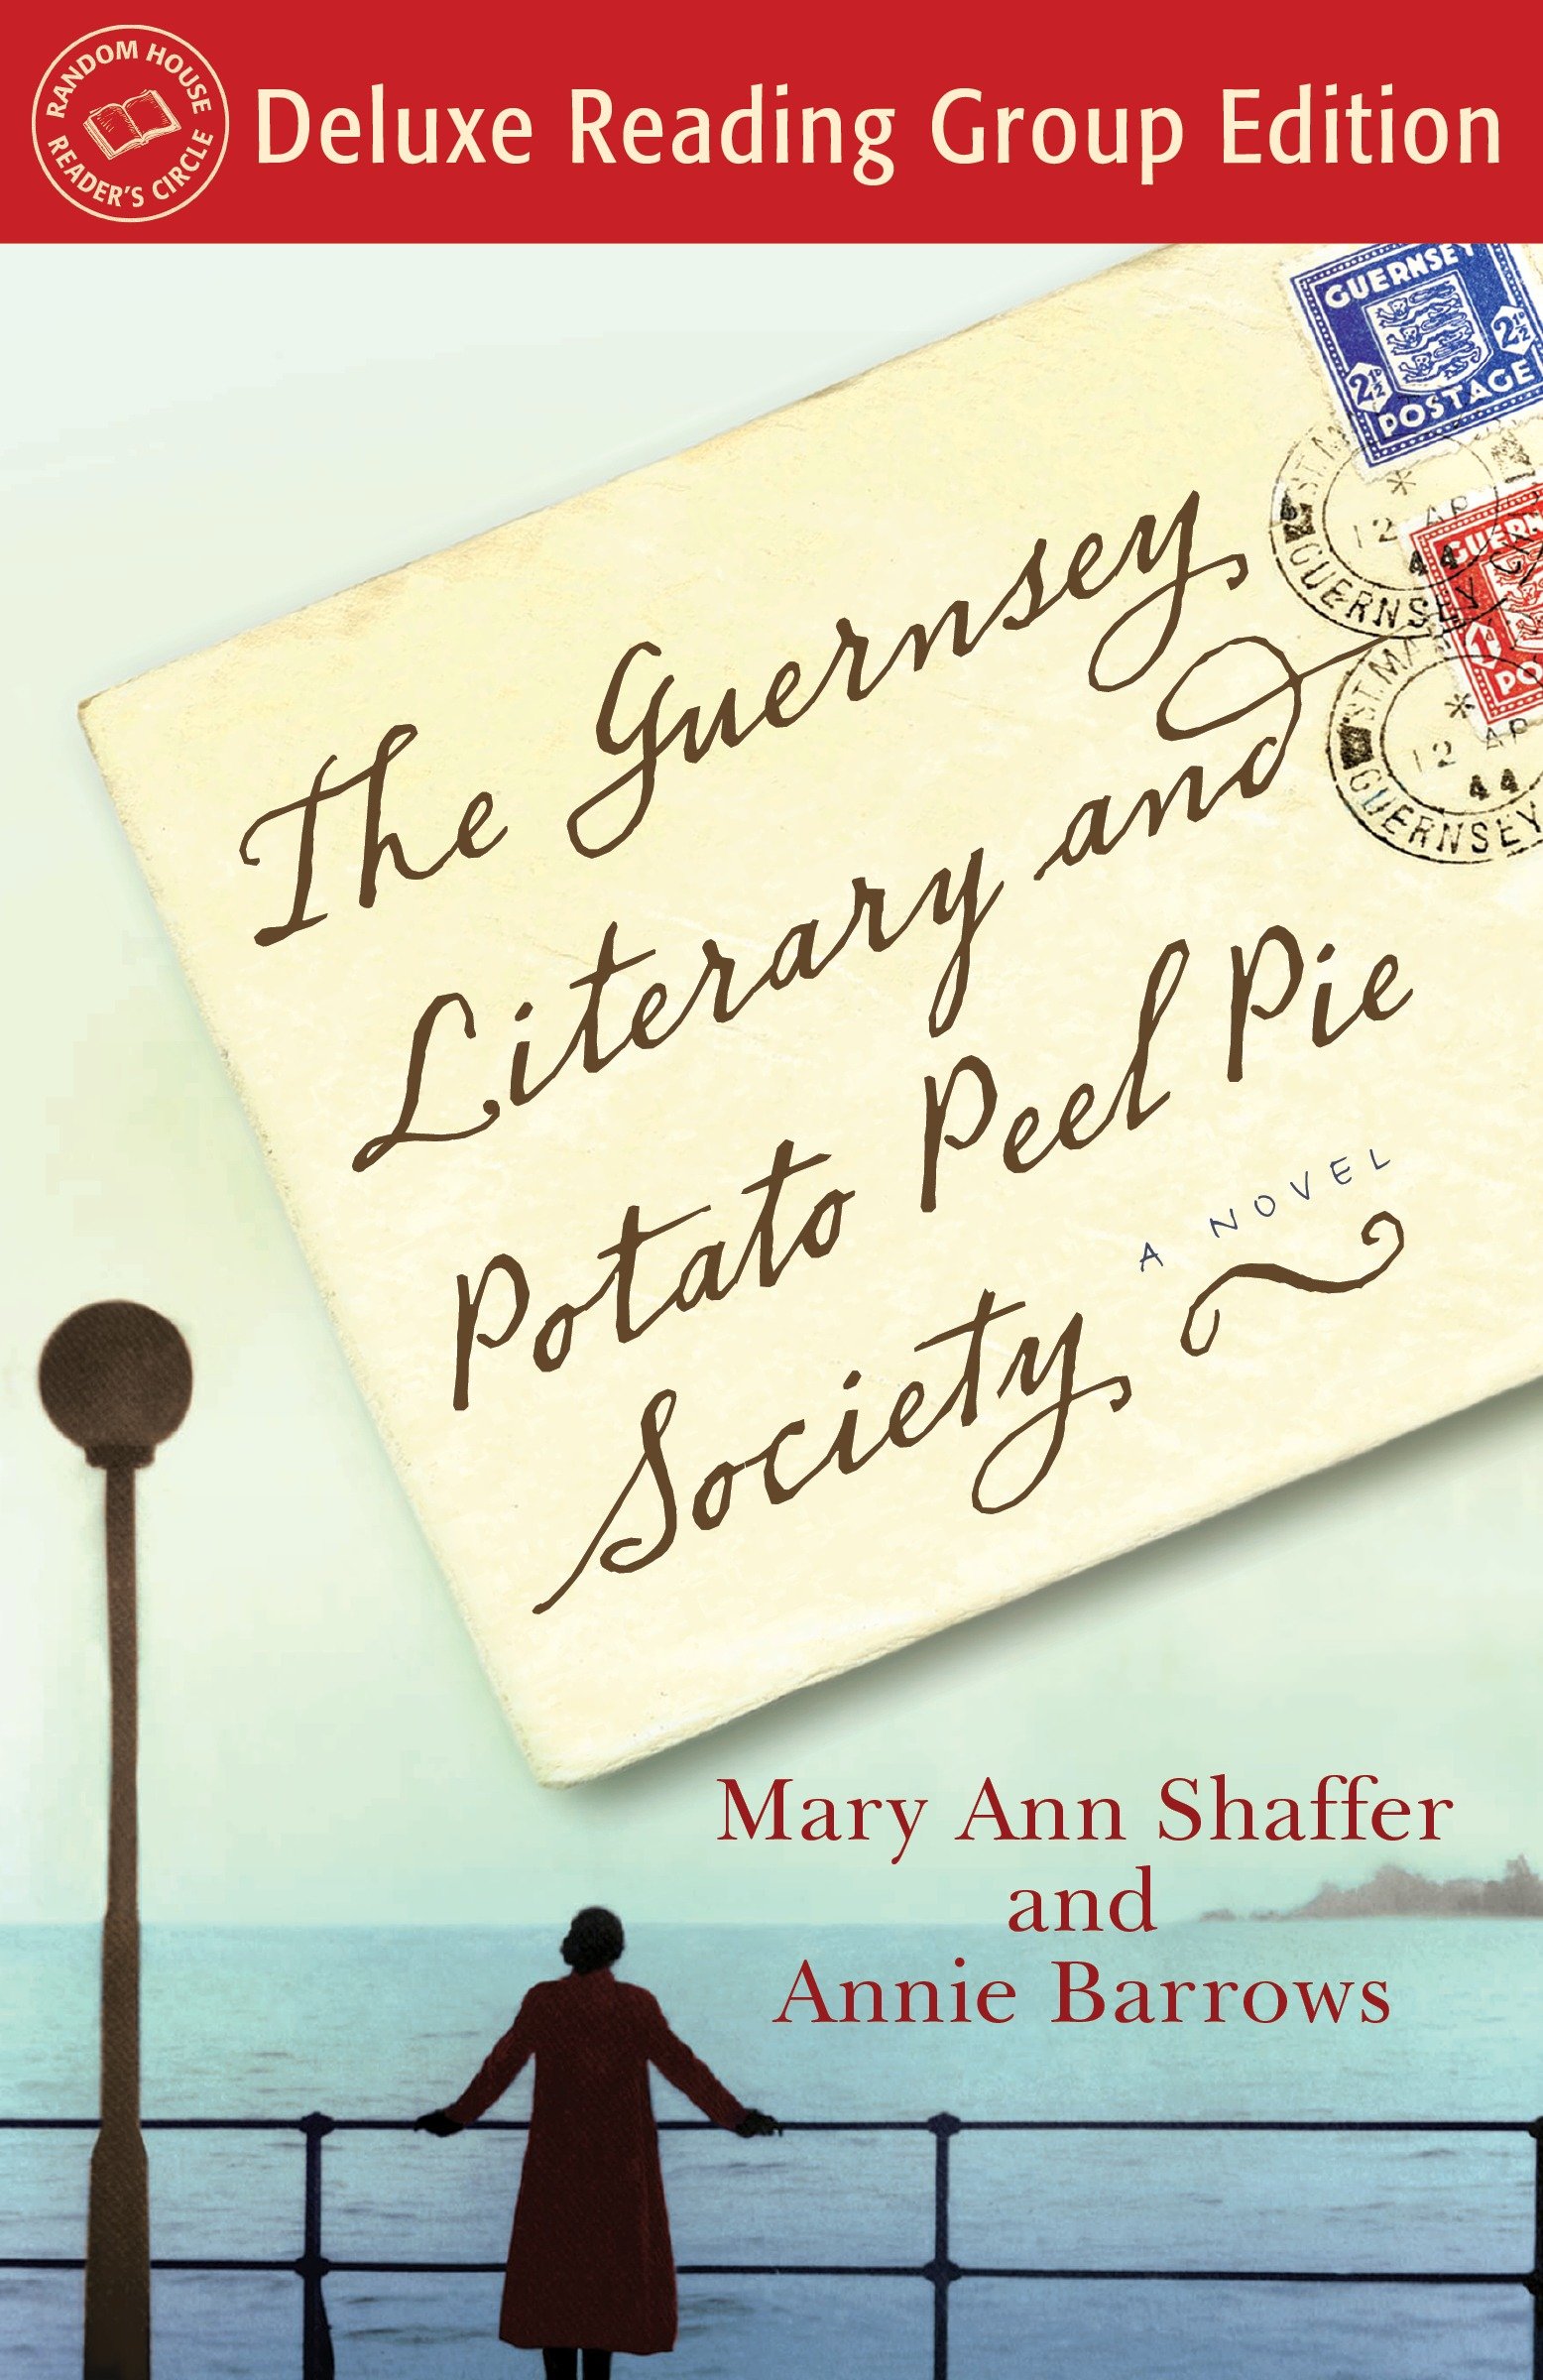 Umschlagbild für The Guernsey Literary and Potato Peel Pie Society (Random House Reader's Circle Deluxe Reading Group Edition) [electronic resource] : A Novel